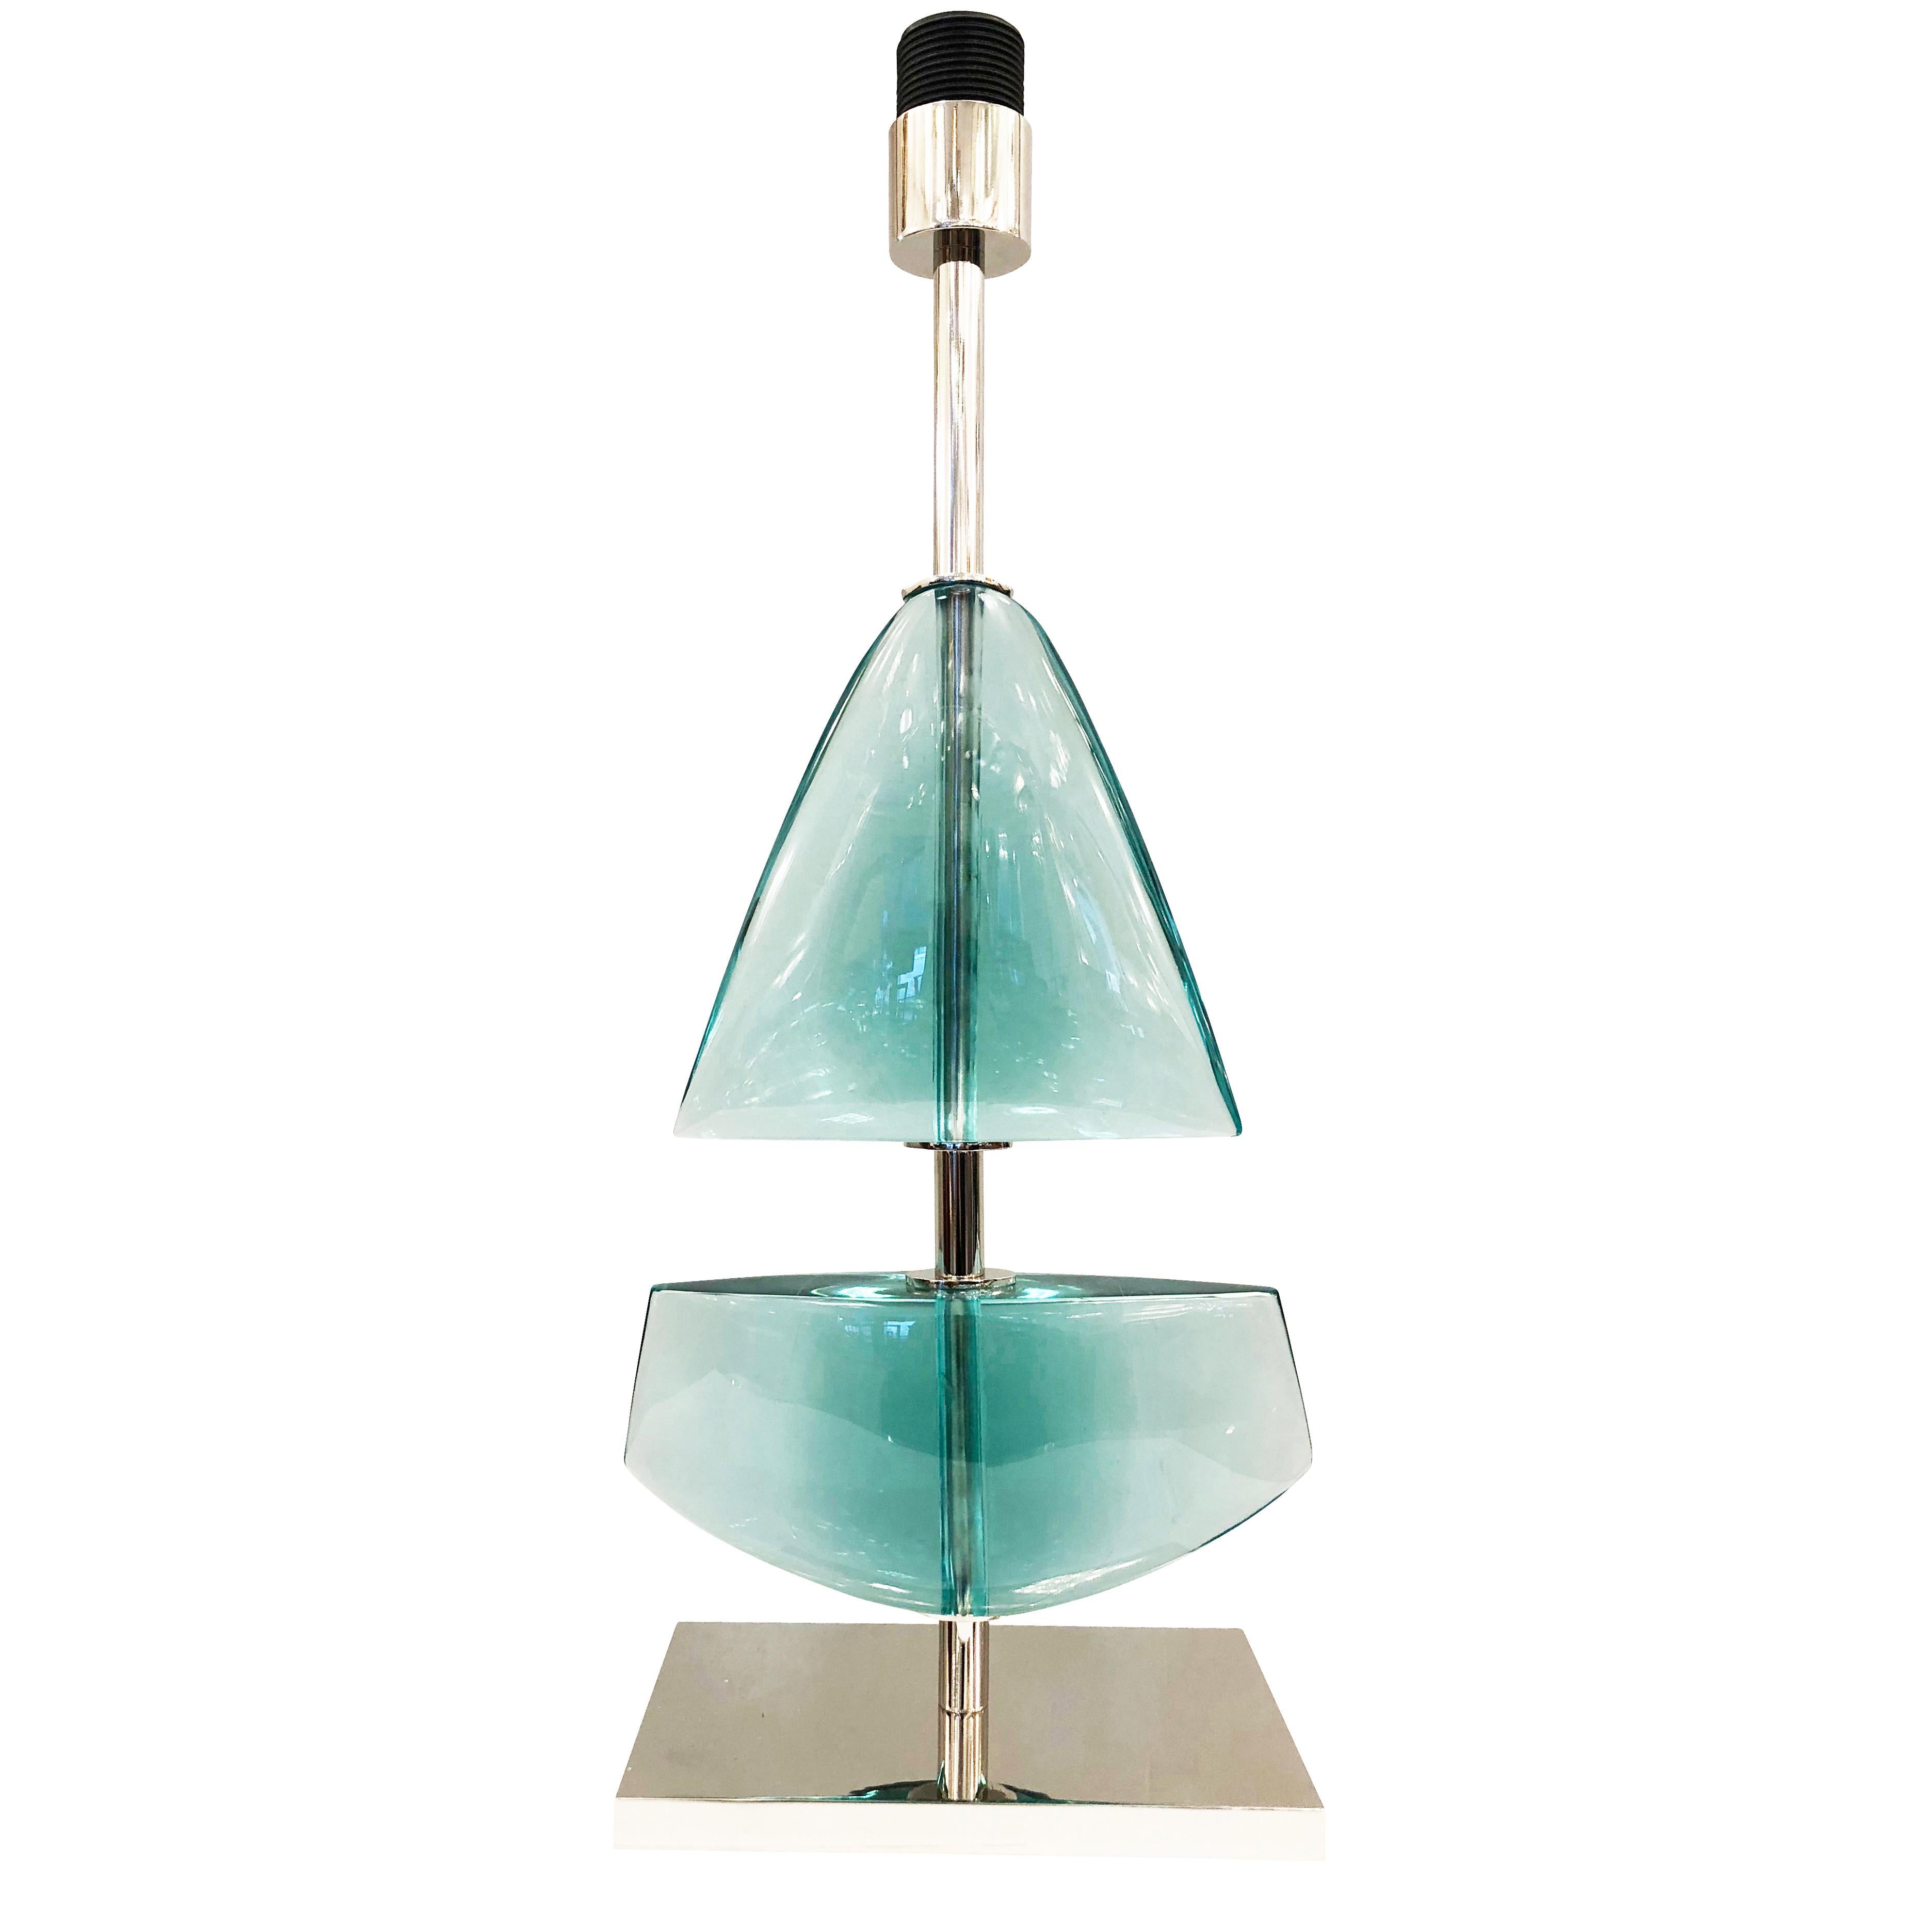 Limited edition glass table lamp made by glass artist Effetto Vetro for Gaspare Asaro’s studio line, formA. Each lamp is hand carved in two sections reminiscent of a sail boat. Available in six different colors. The stem and base are nickel but can